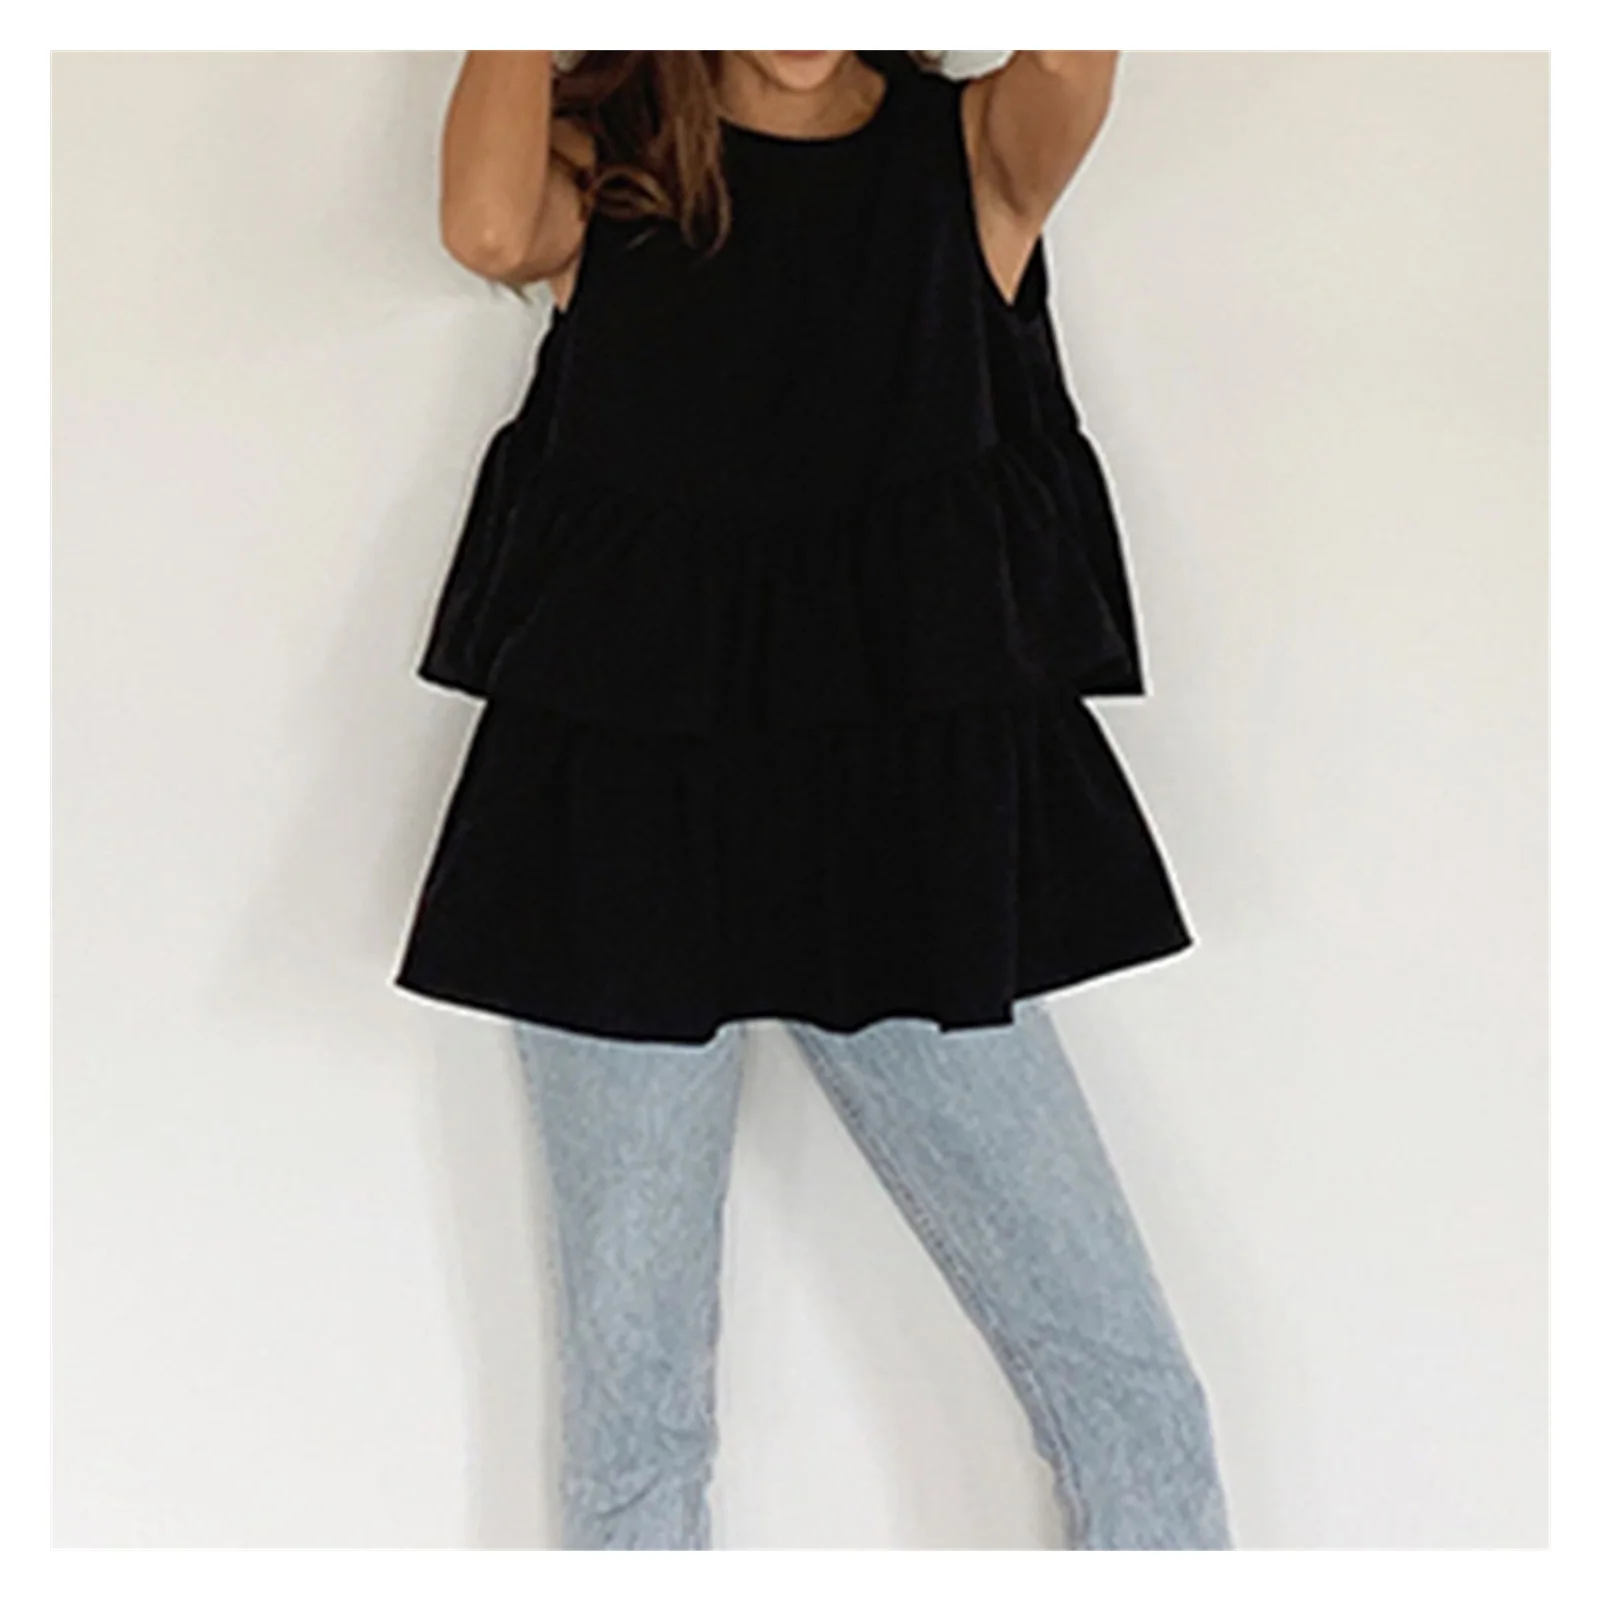 

NEW Lace-Up Round Neck Plain Sleeveless Women's Blouse Slim Hedging Casual Style Solid Color Spring Autumn Summer Fashion